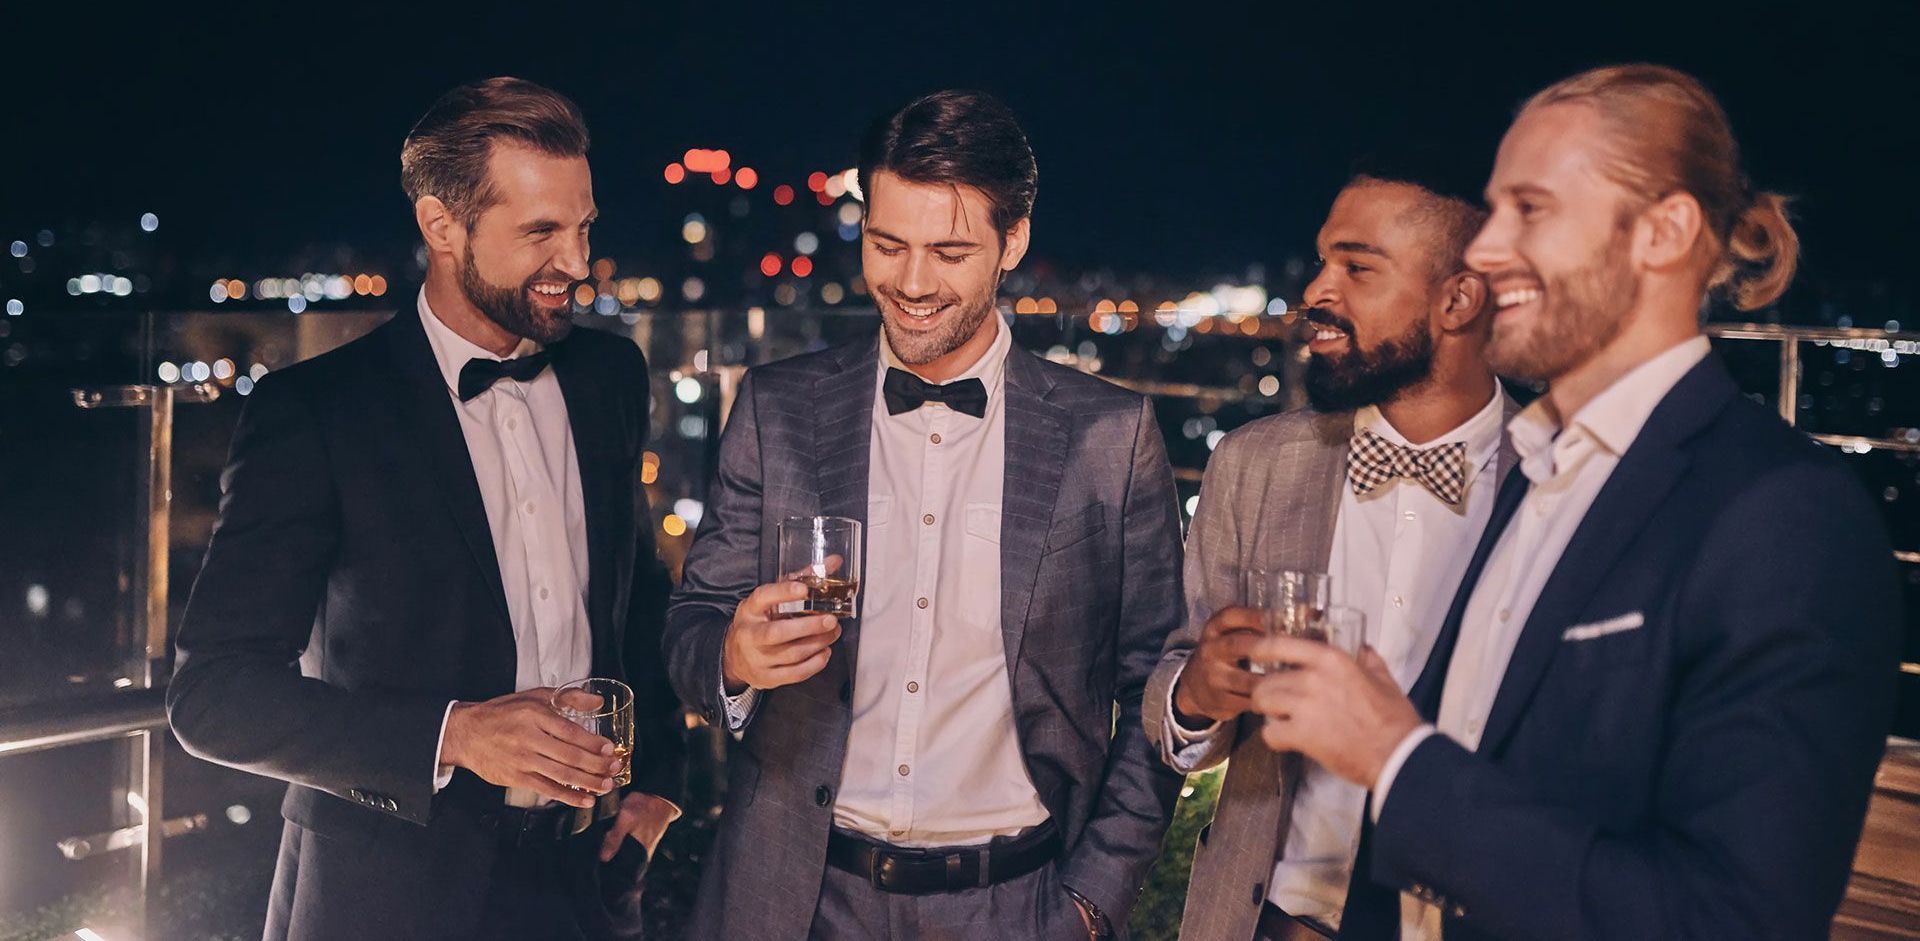 Group of handsome young men in suits